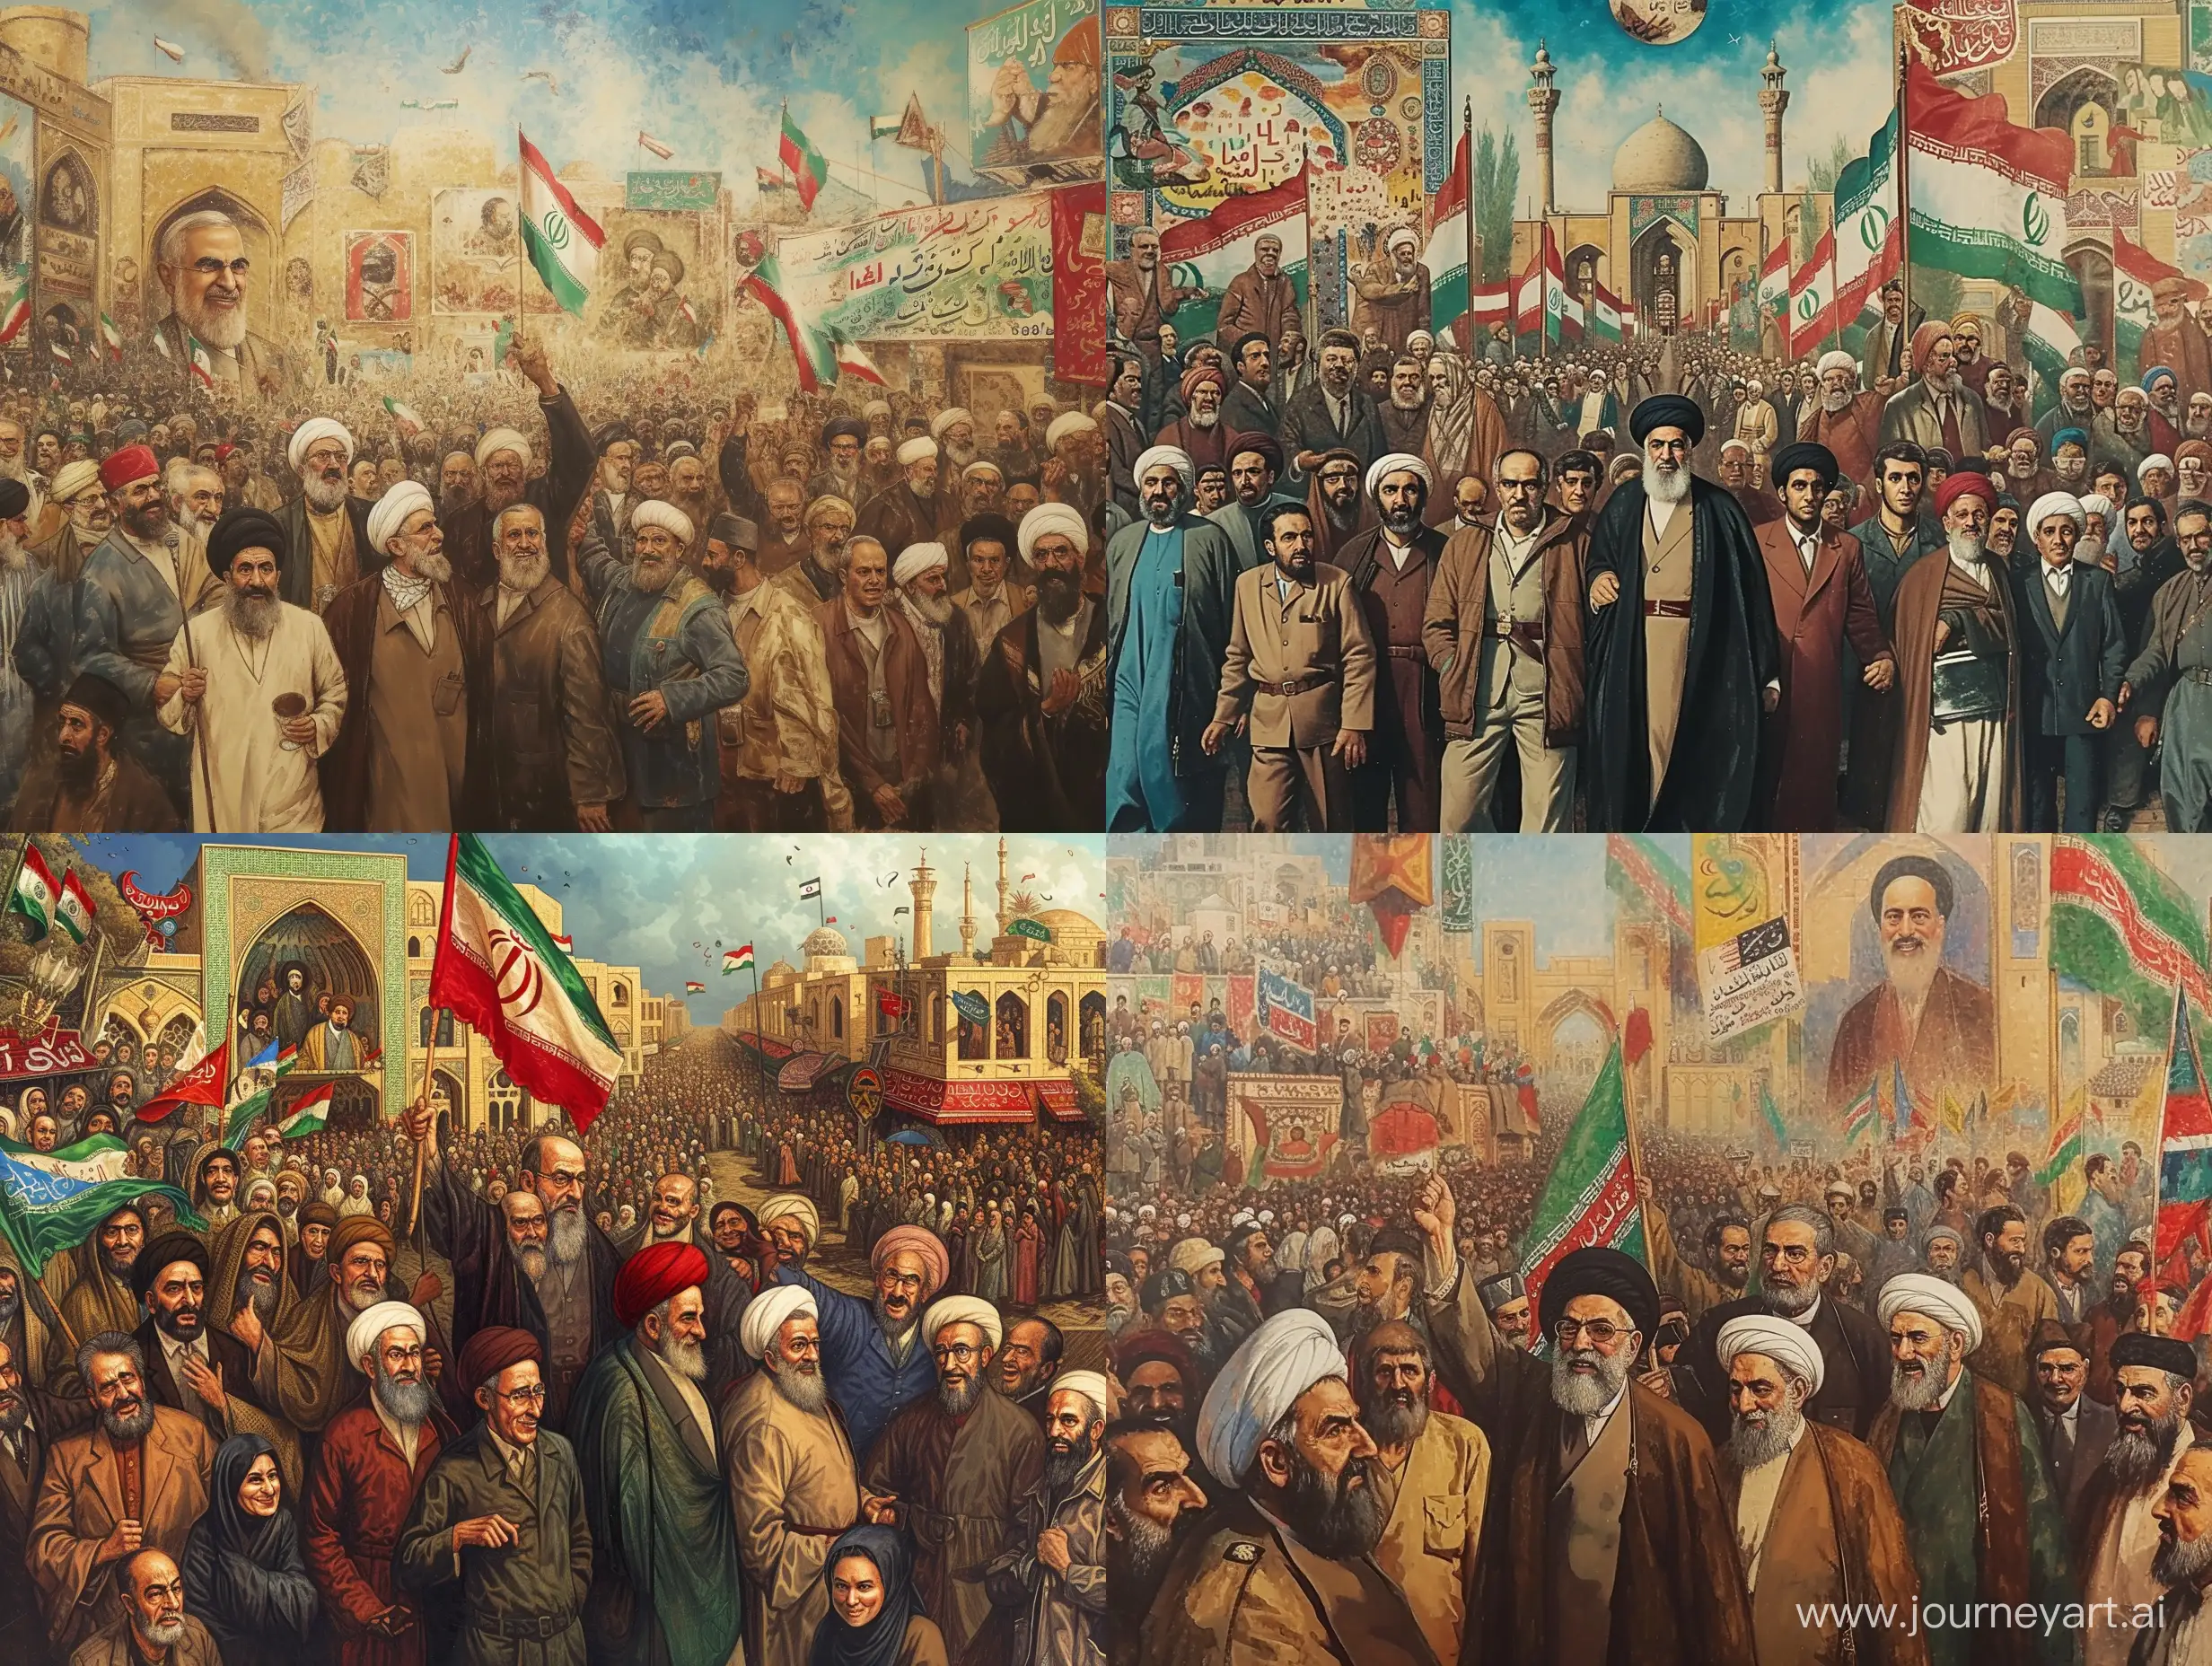 An image of Imam Khomeini returning to Iran, greeted warmly by the people: Imagine a historical scene with emotional and enthusiastic ambiance, where different faces of people express happiness and hope in welcoming leadership. A background of an Iranian city with displays of traditional architecture and revolutionary symbols, like flags and banners with revolutionary slogans. --v 6 --ar 4:3 --no 40696